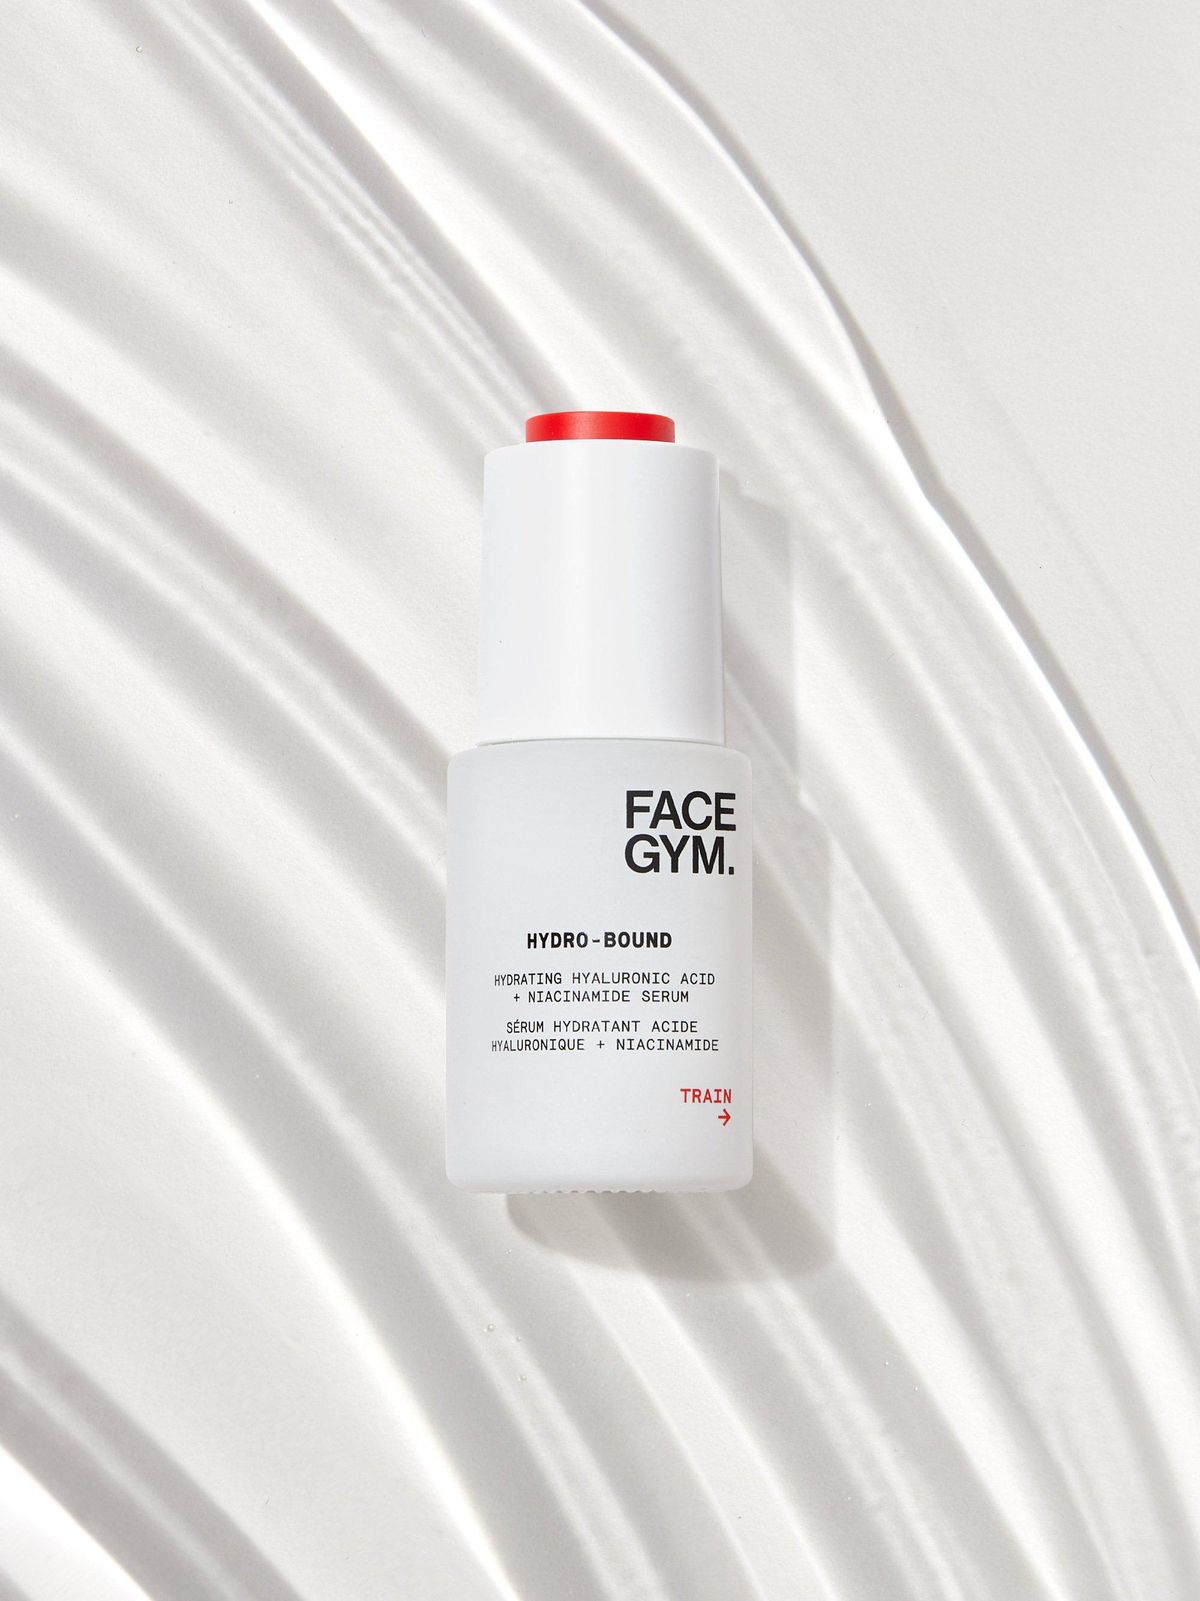 face gym hydro bound hyaluronic acid and niacninamide serum